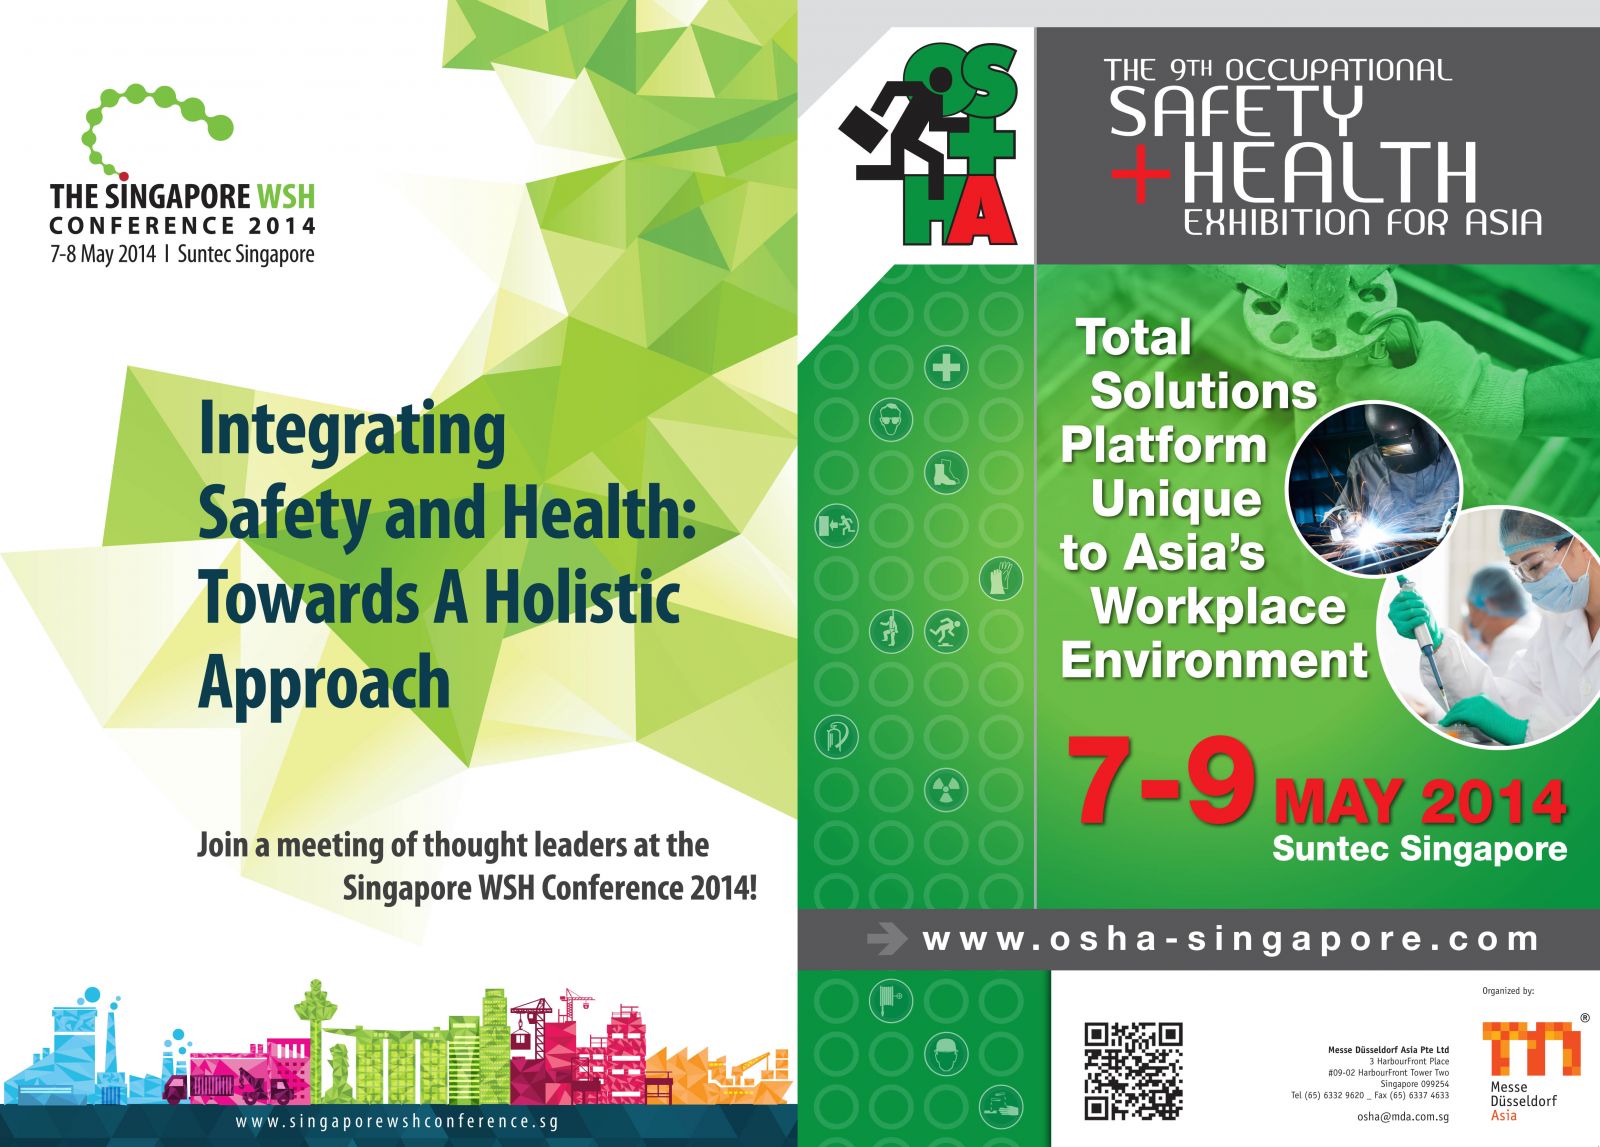 Confirmed our participation in The 9th Occupational Safety + Health Exhibition for Asia